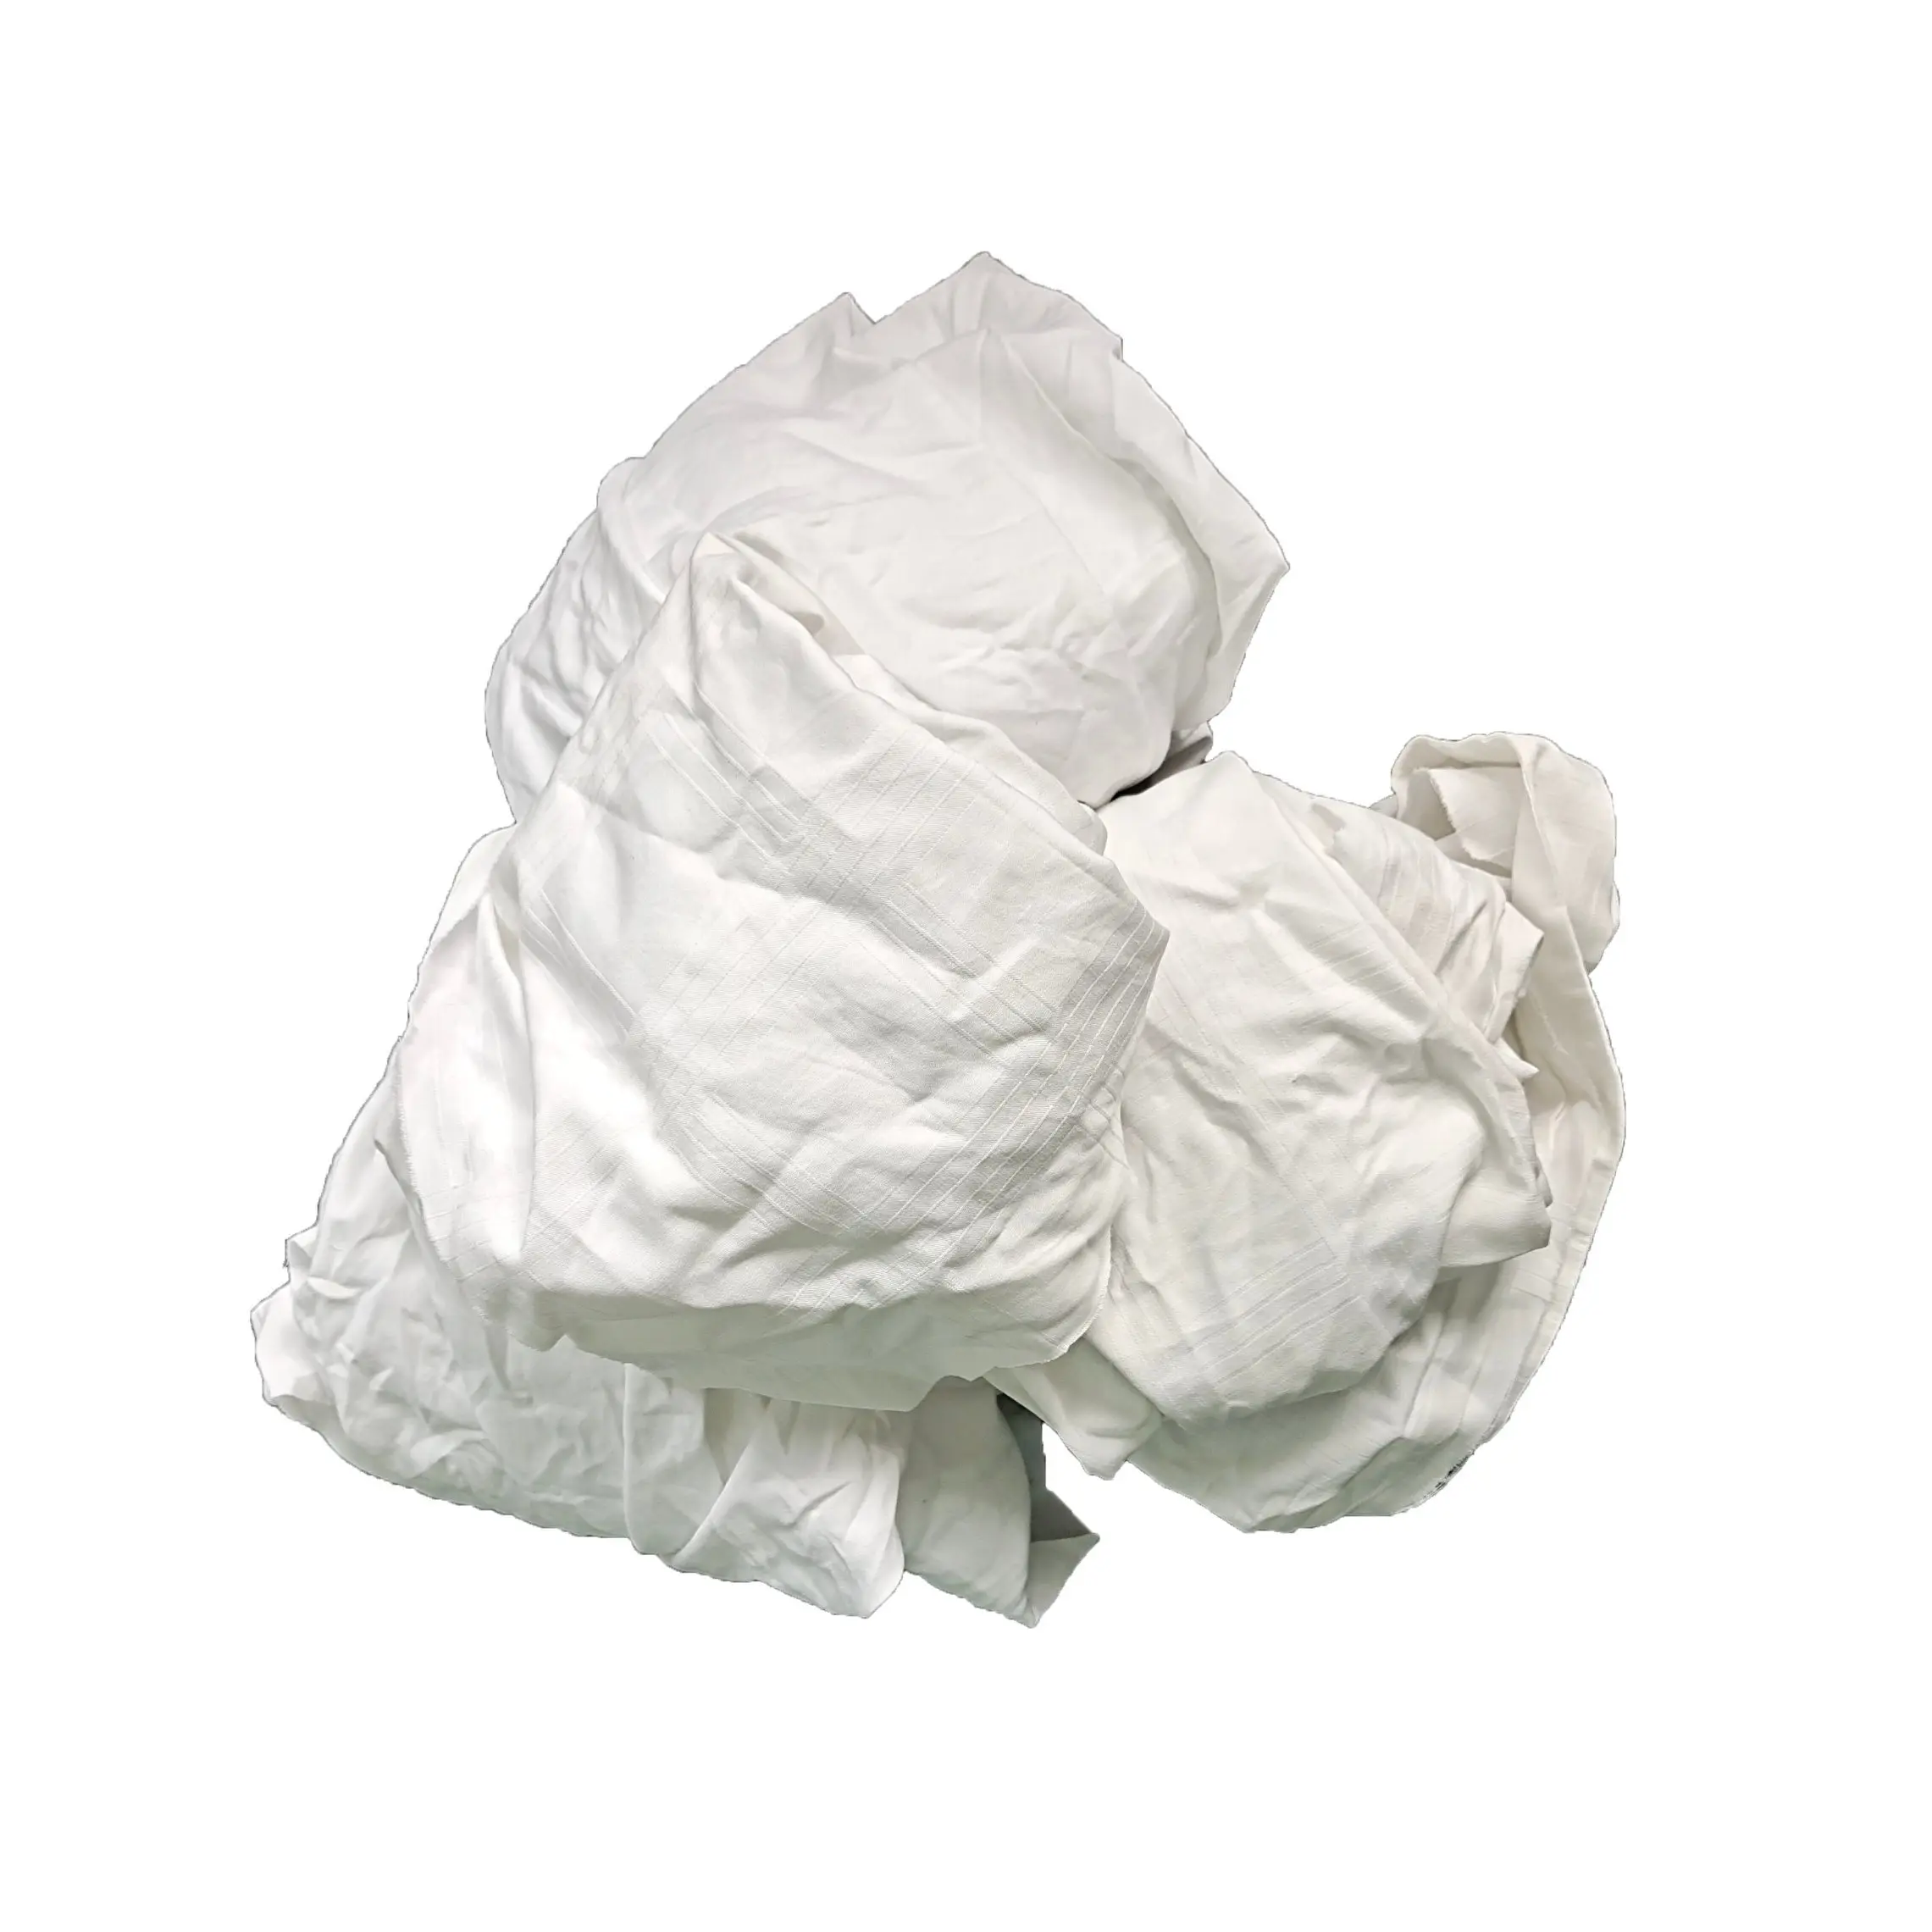 White Cotton RAGS 10 kg - World Gate General Trading